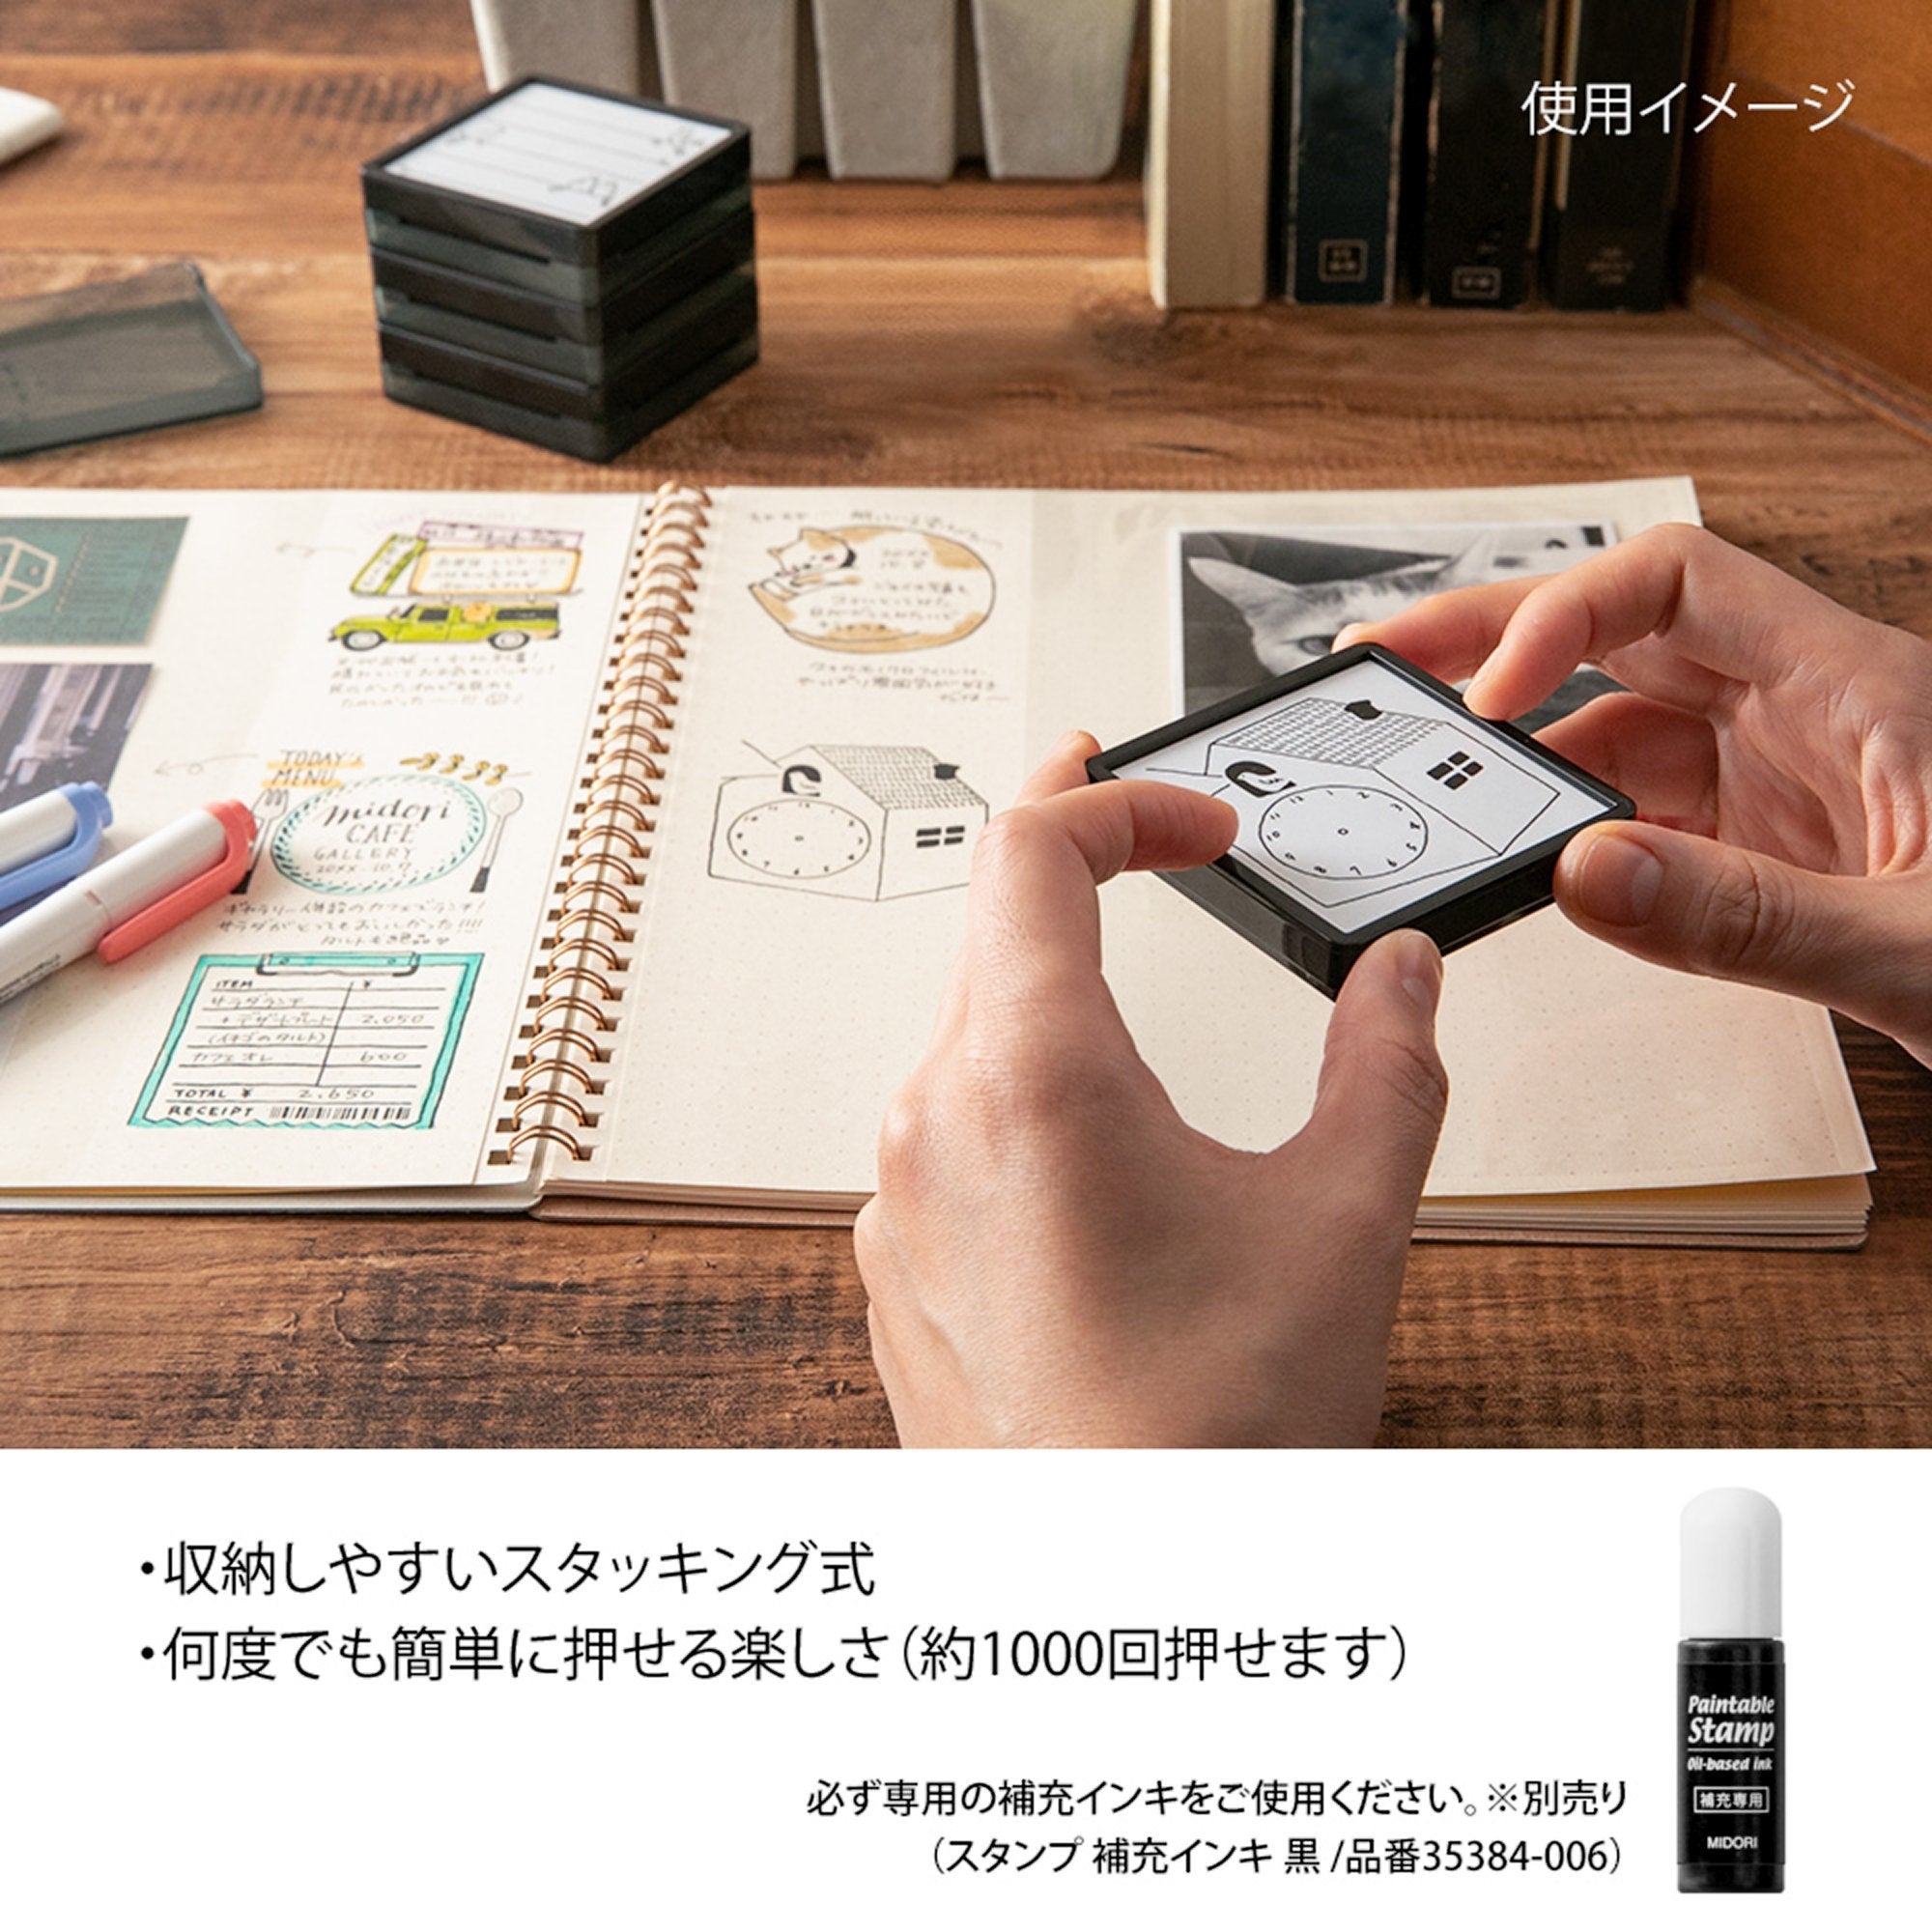 Midori Square Paintable Stamp Re-Inkable Self-Inking Stamp | MONEY TRACKING Ledger Receipt Blue Package - The Stationery Life!